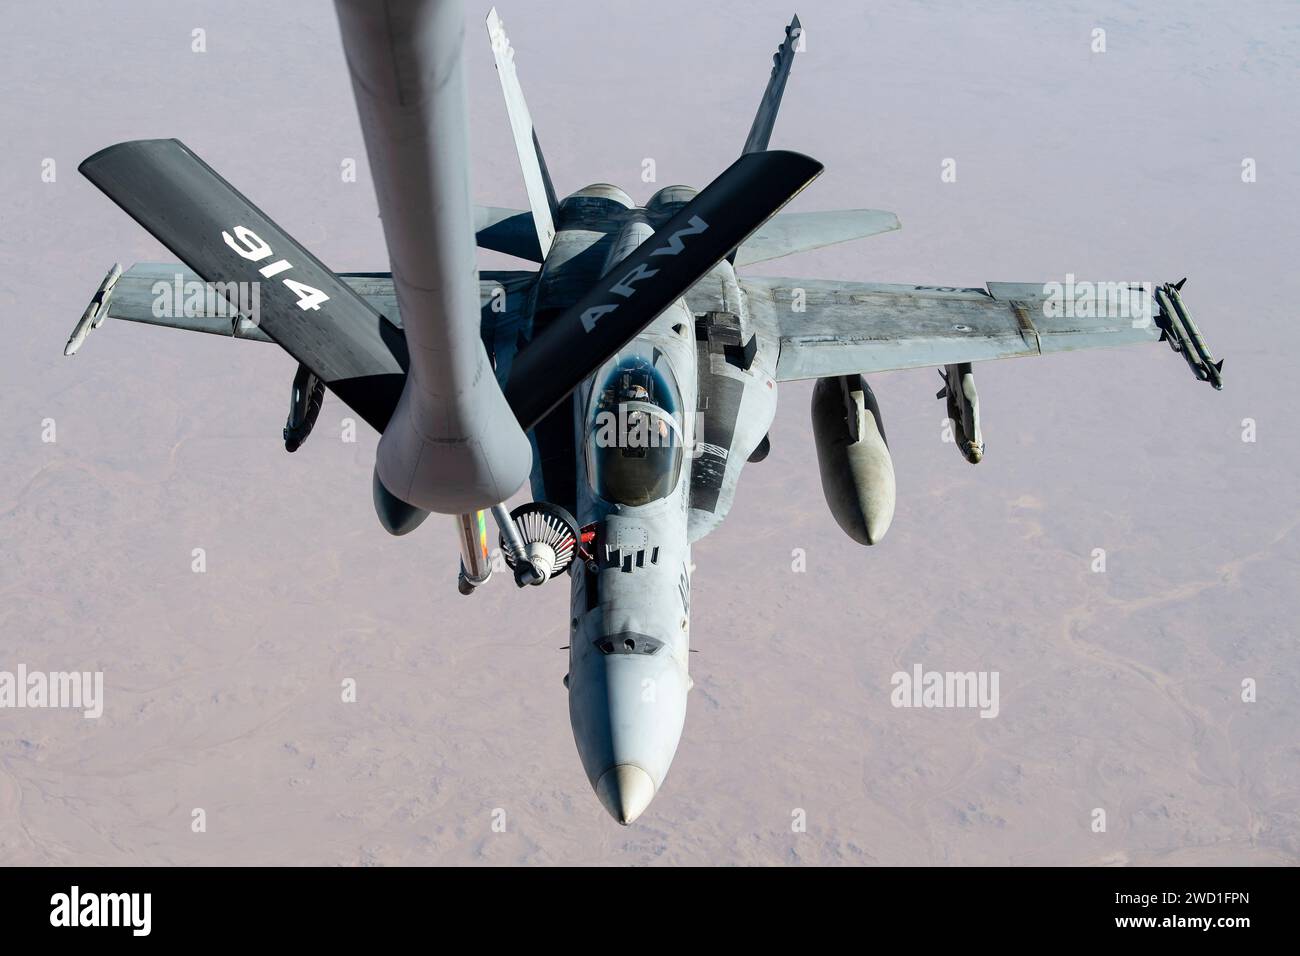 A U.S. Marine Corps F/A-18C Hornet receives fuel during a mission. Stock Photo